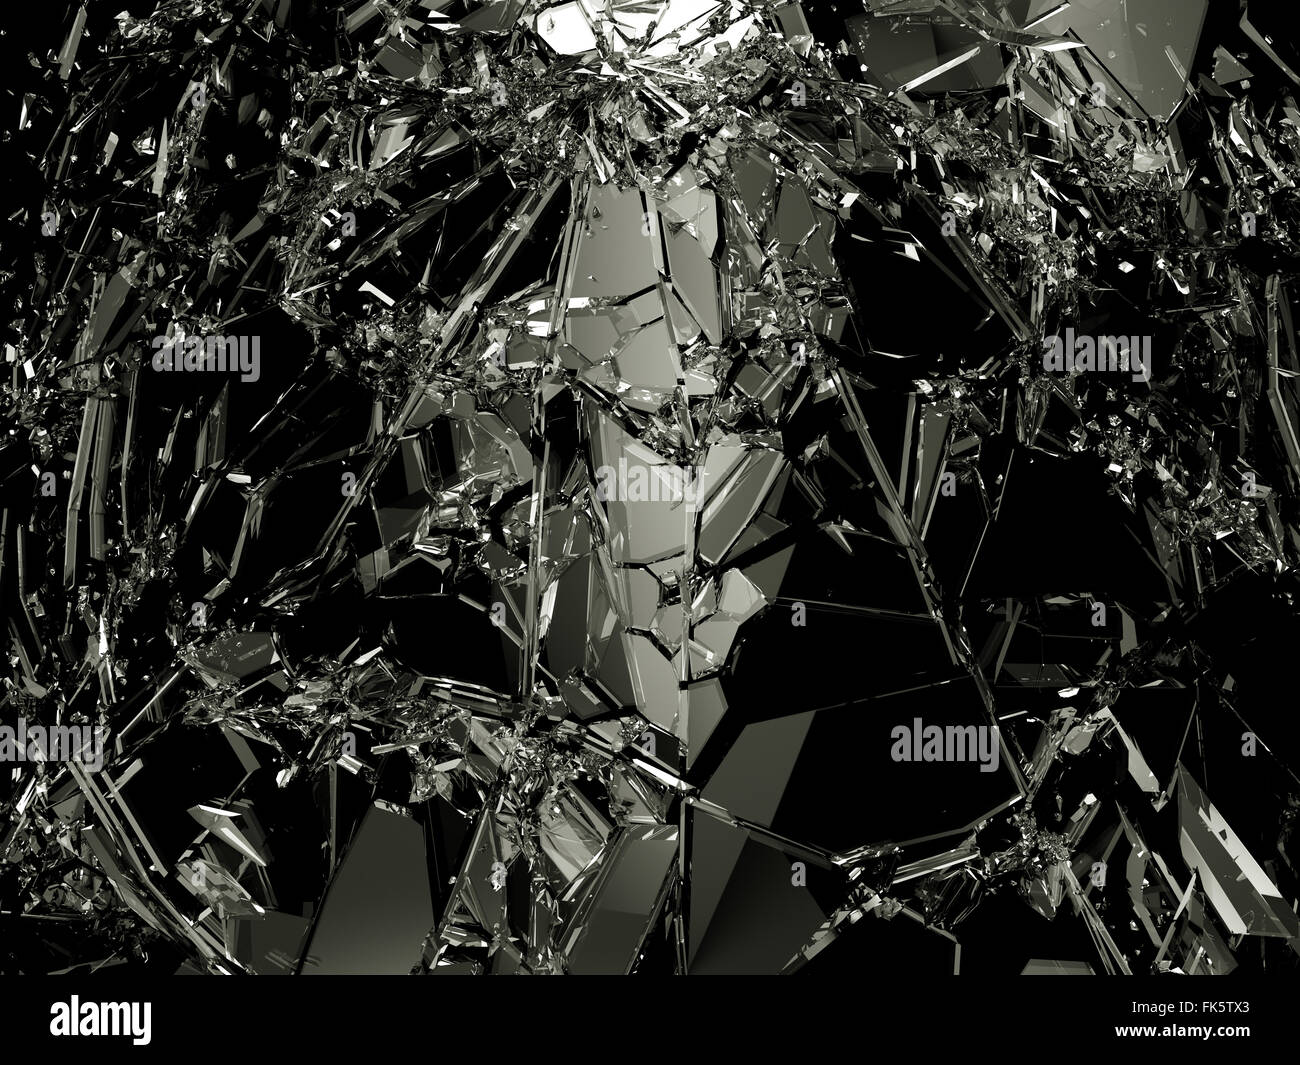 https://c8.alamy.com/comp/FK5TX3/pieces-of-destructed-shattered-glass-on-white-large-resolution-FK5TX3.jpg